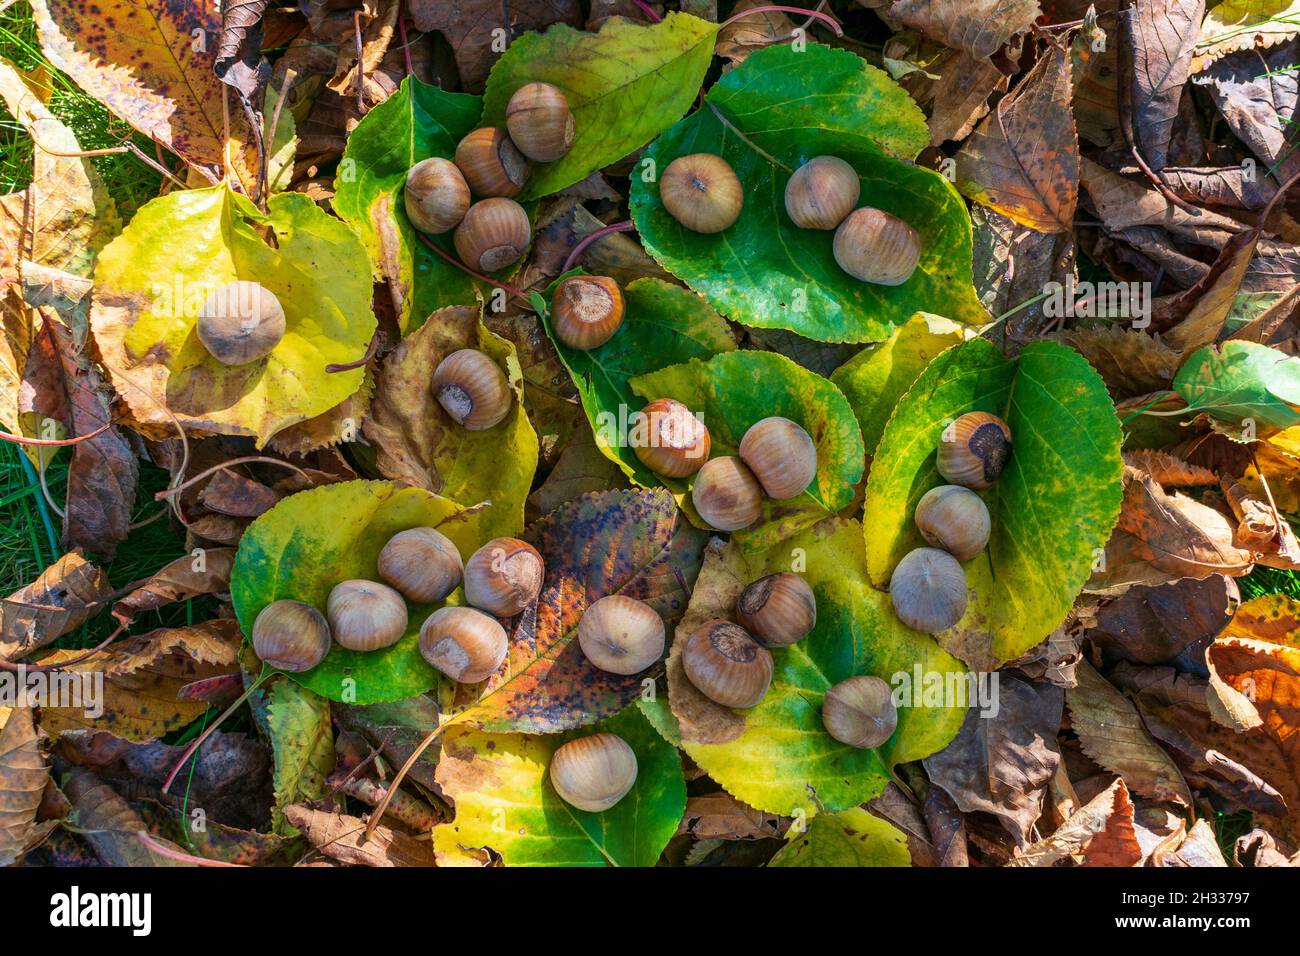 Hazelnuts Among Fall Colored Leaves In The Forest Stock Photo